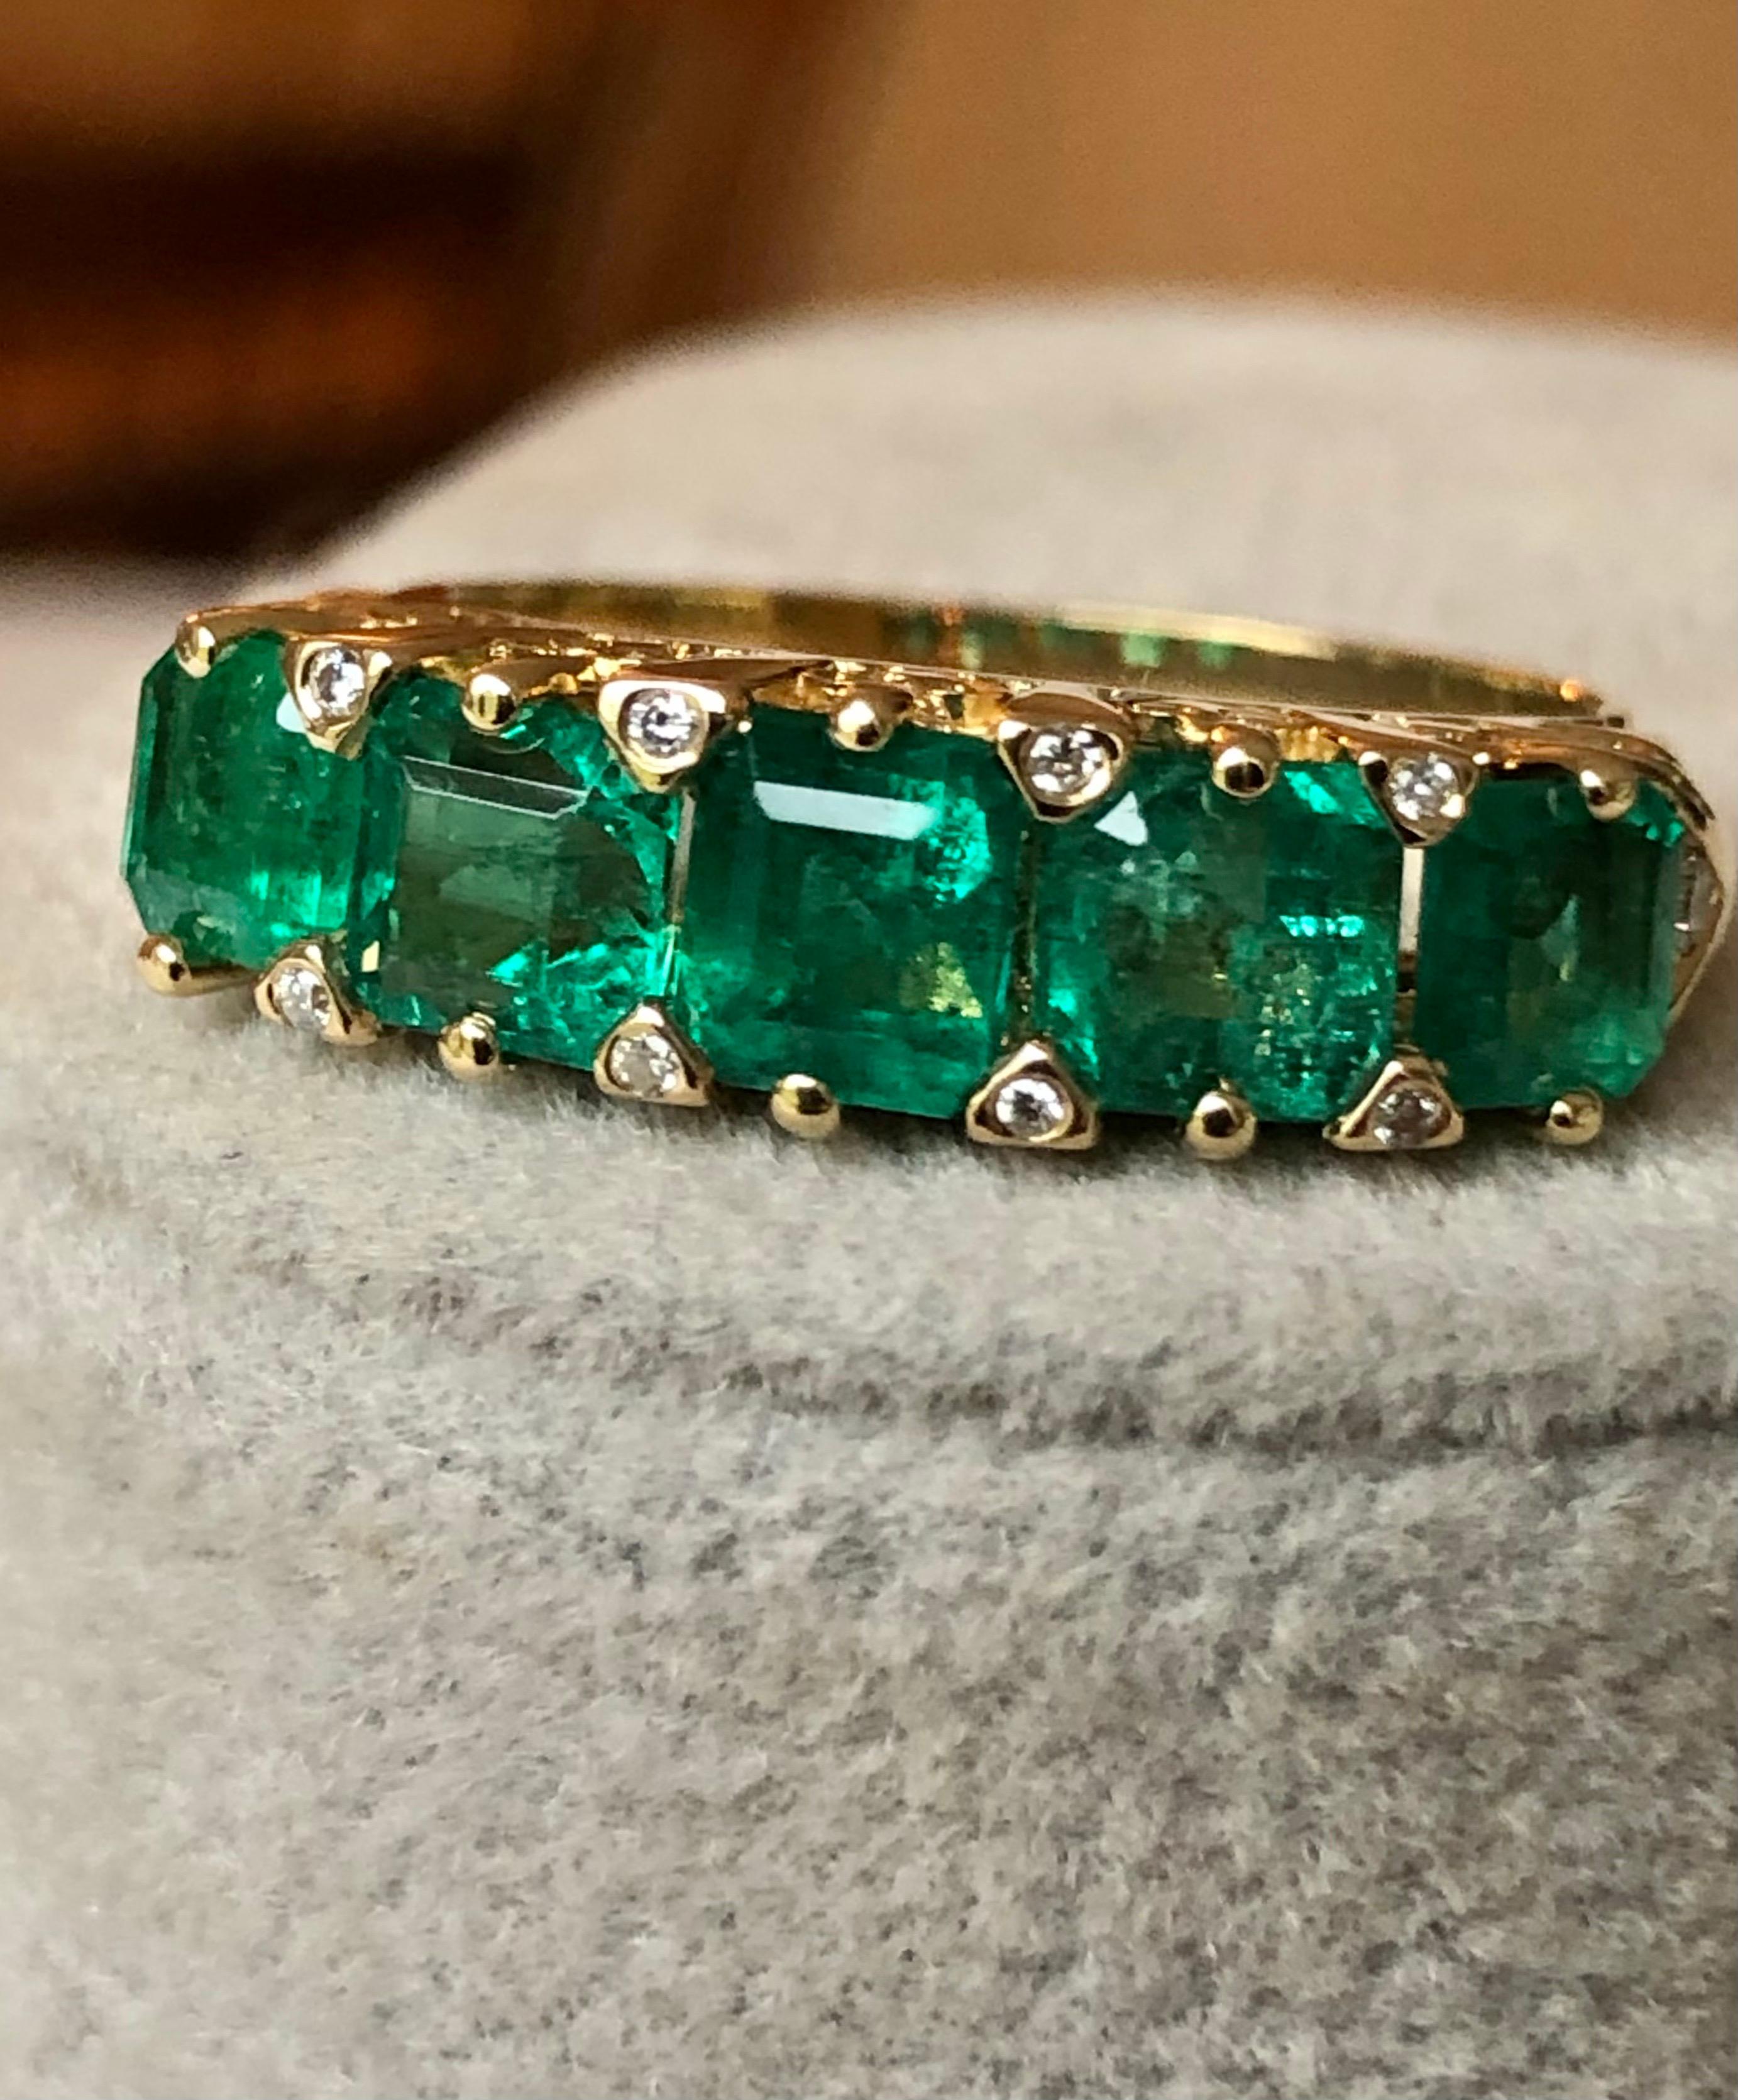 New Inspired on Victorian Era! Magnificent Colombian Emerald Five-Stone Ring 18 Karat Gold
The five natural Colombian emeralds show excellent clarity, and excellent color AAA intense medium green, weighing approximately 2.41 carats total,  all claw